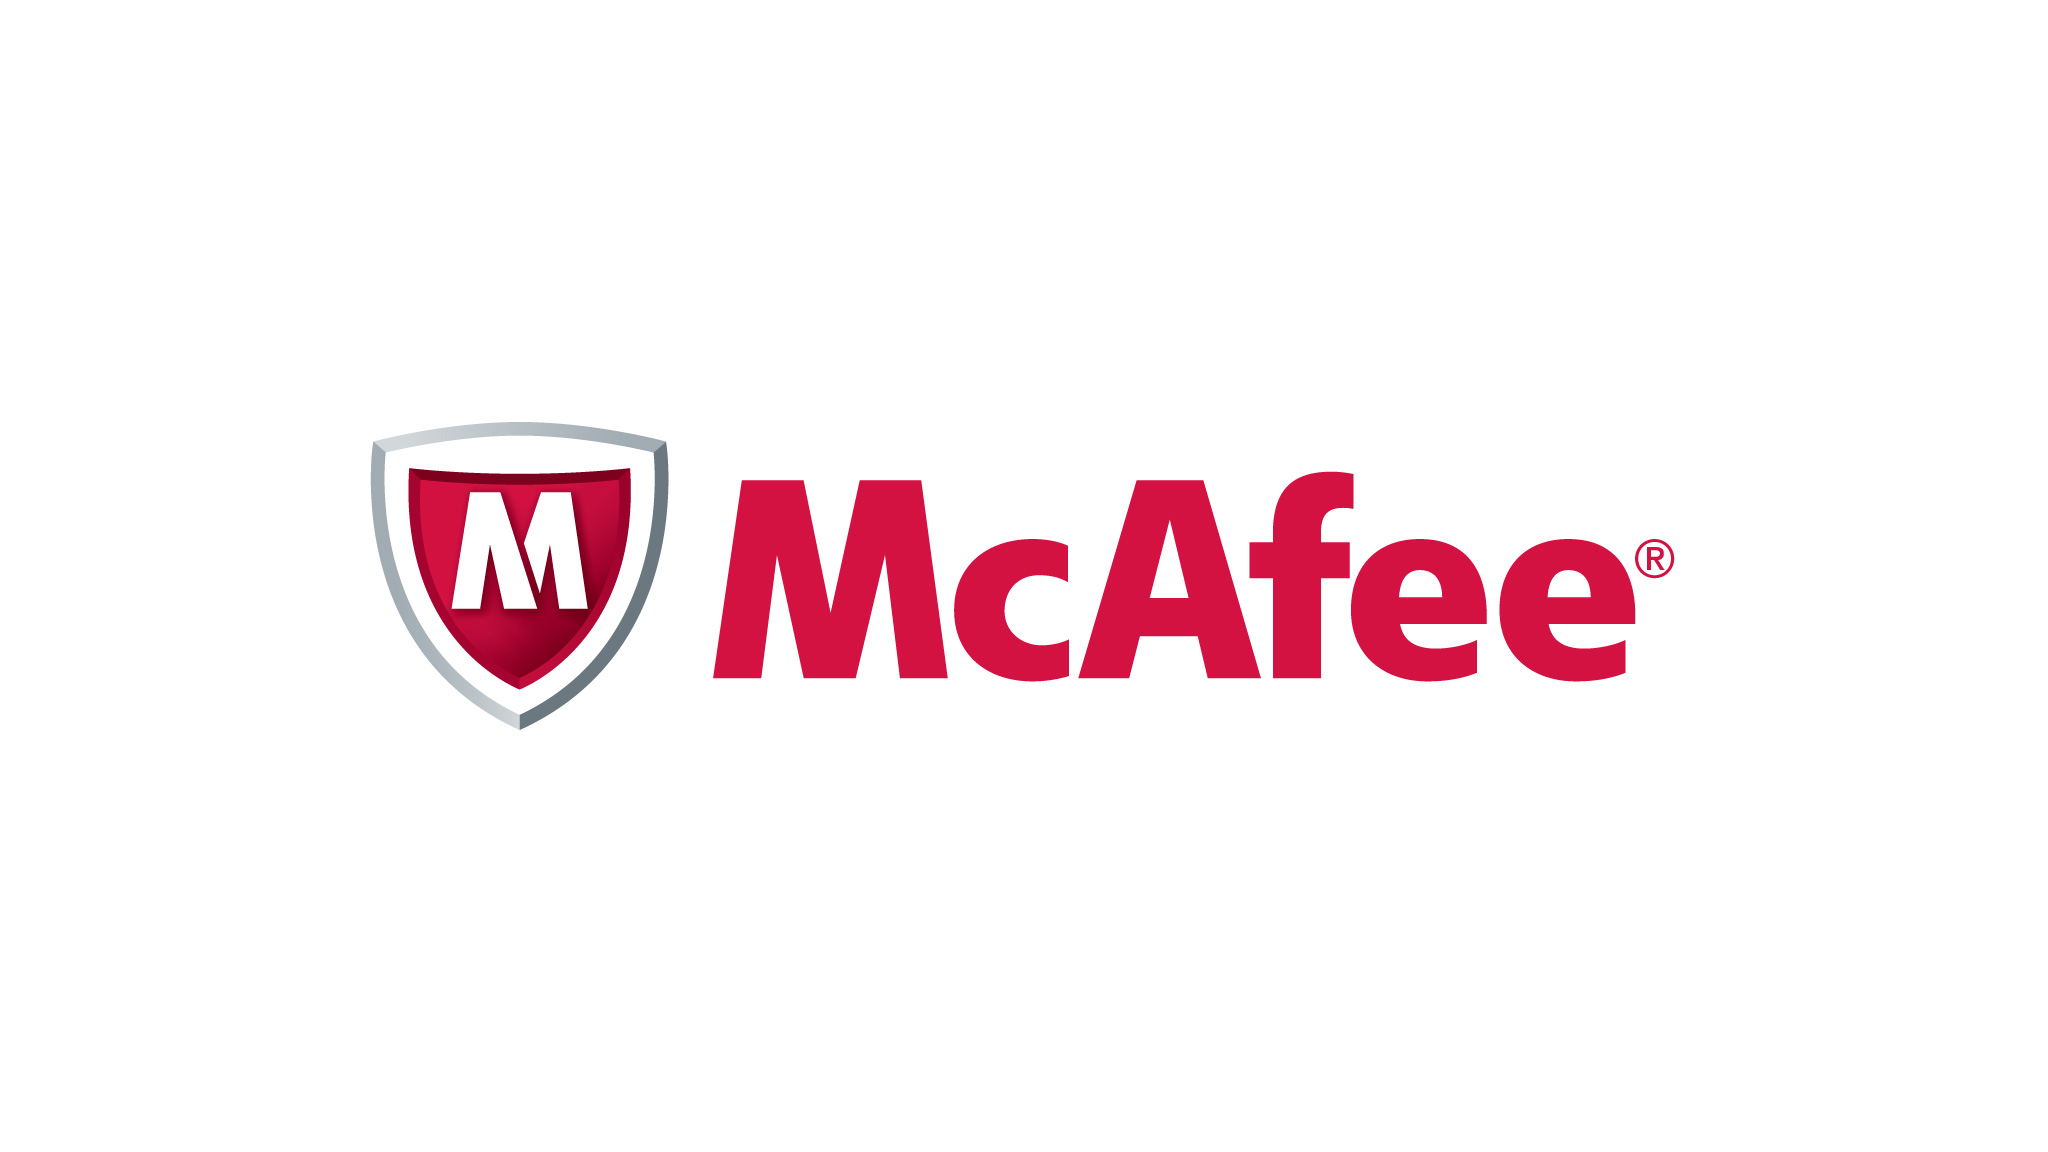 McAfee Unified Portal Vision